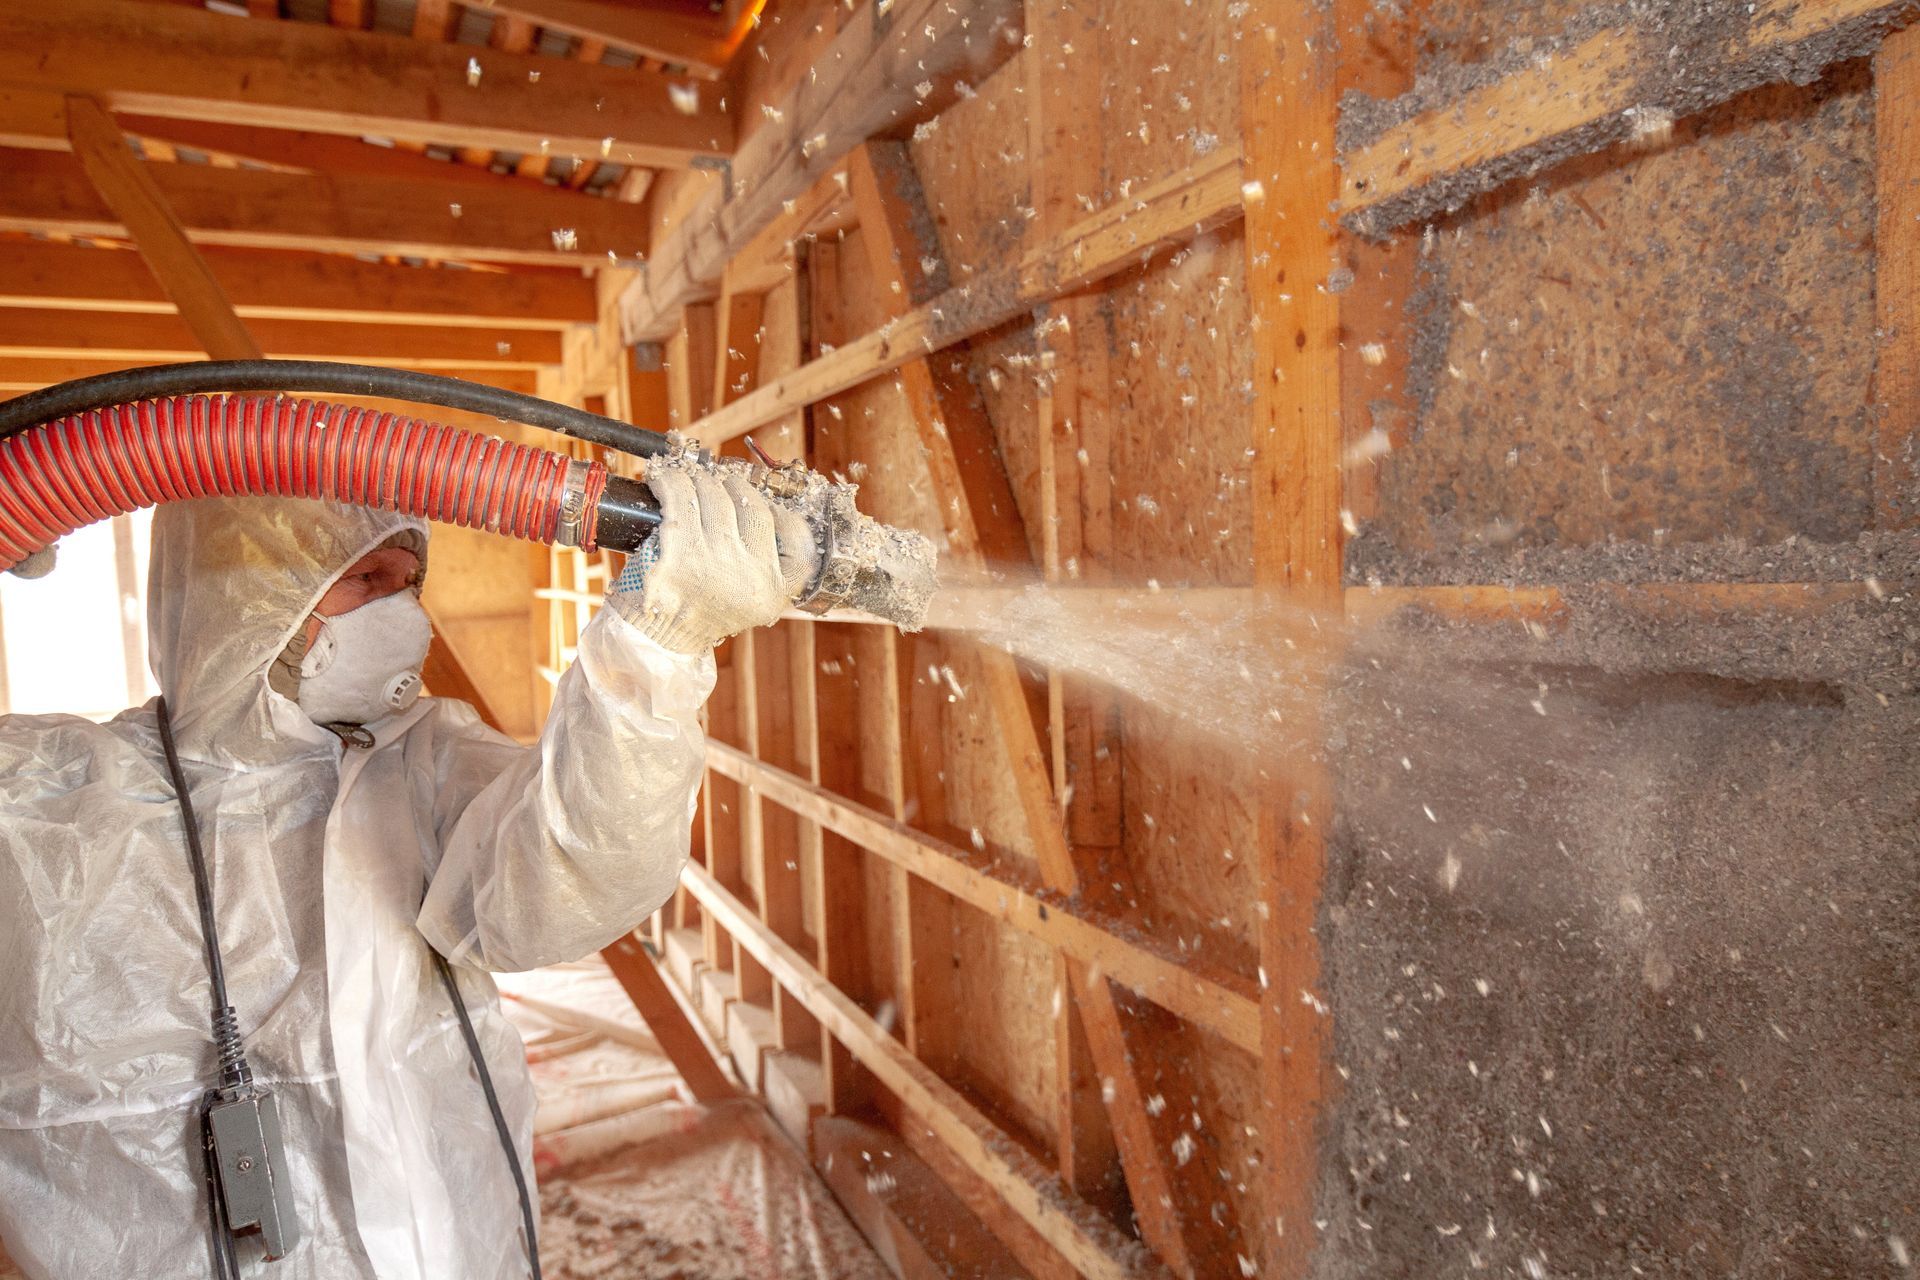 A man in a protective suit is spraying insulation on a wooden wall.